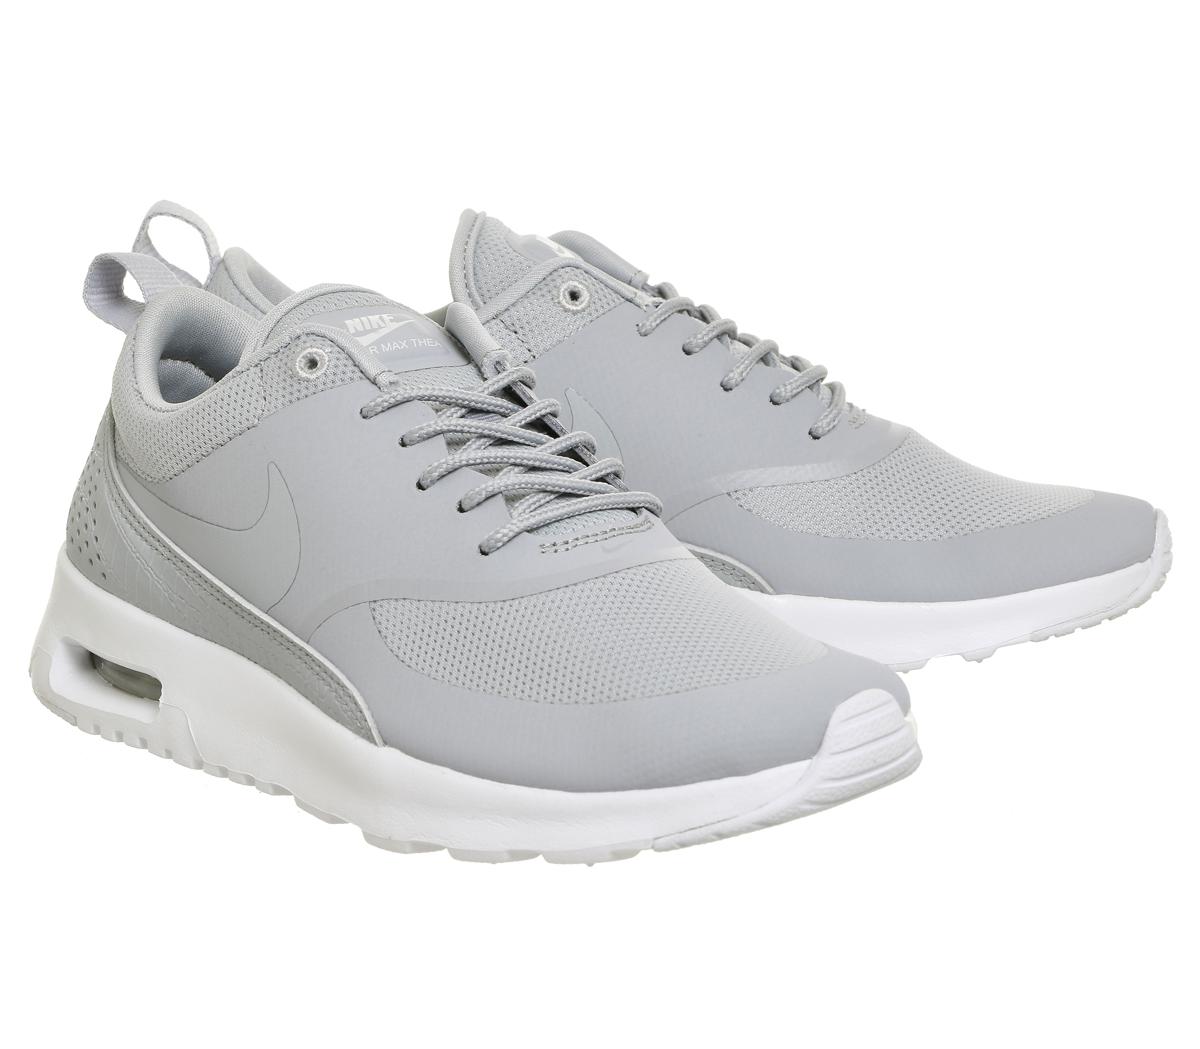 Nike Synthetic Air Max Thea Trainers in Grey (Gray) - Lyst